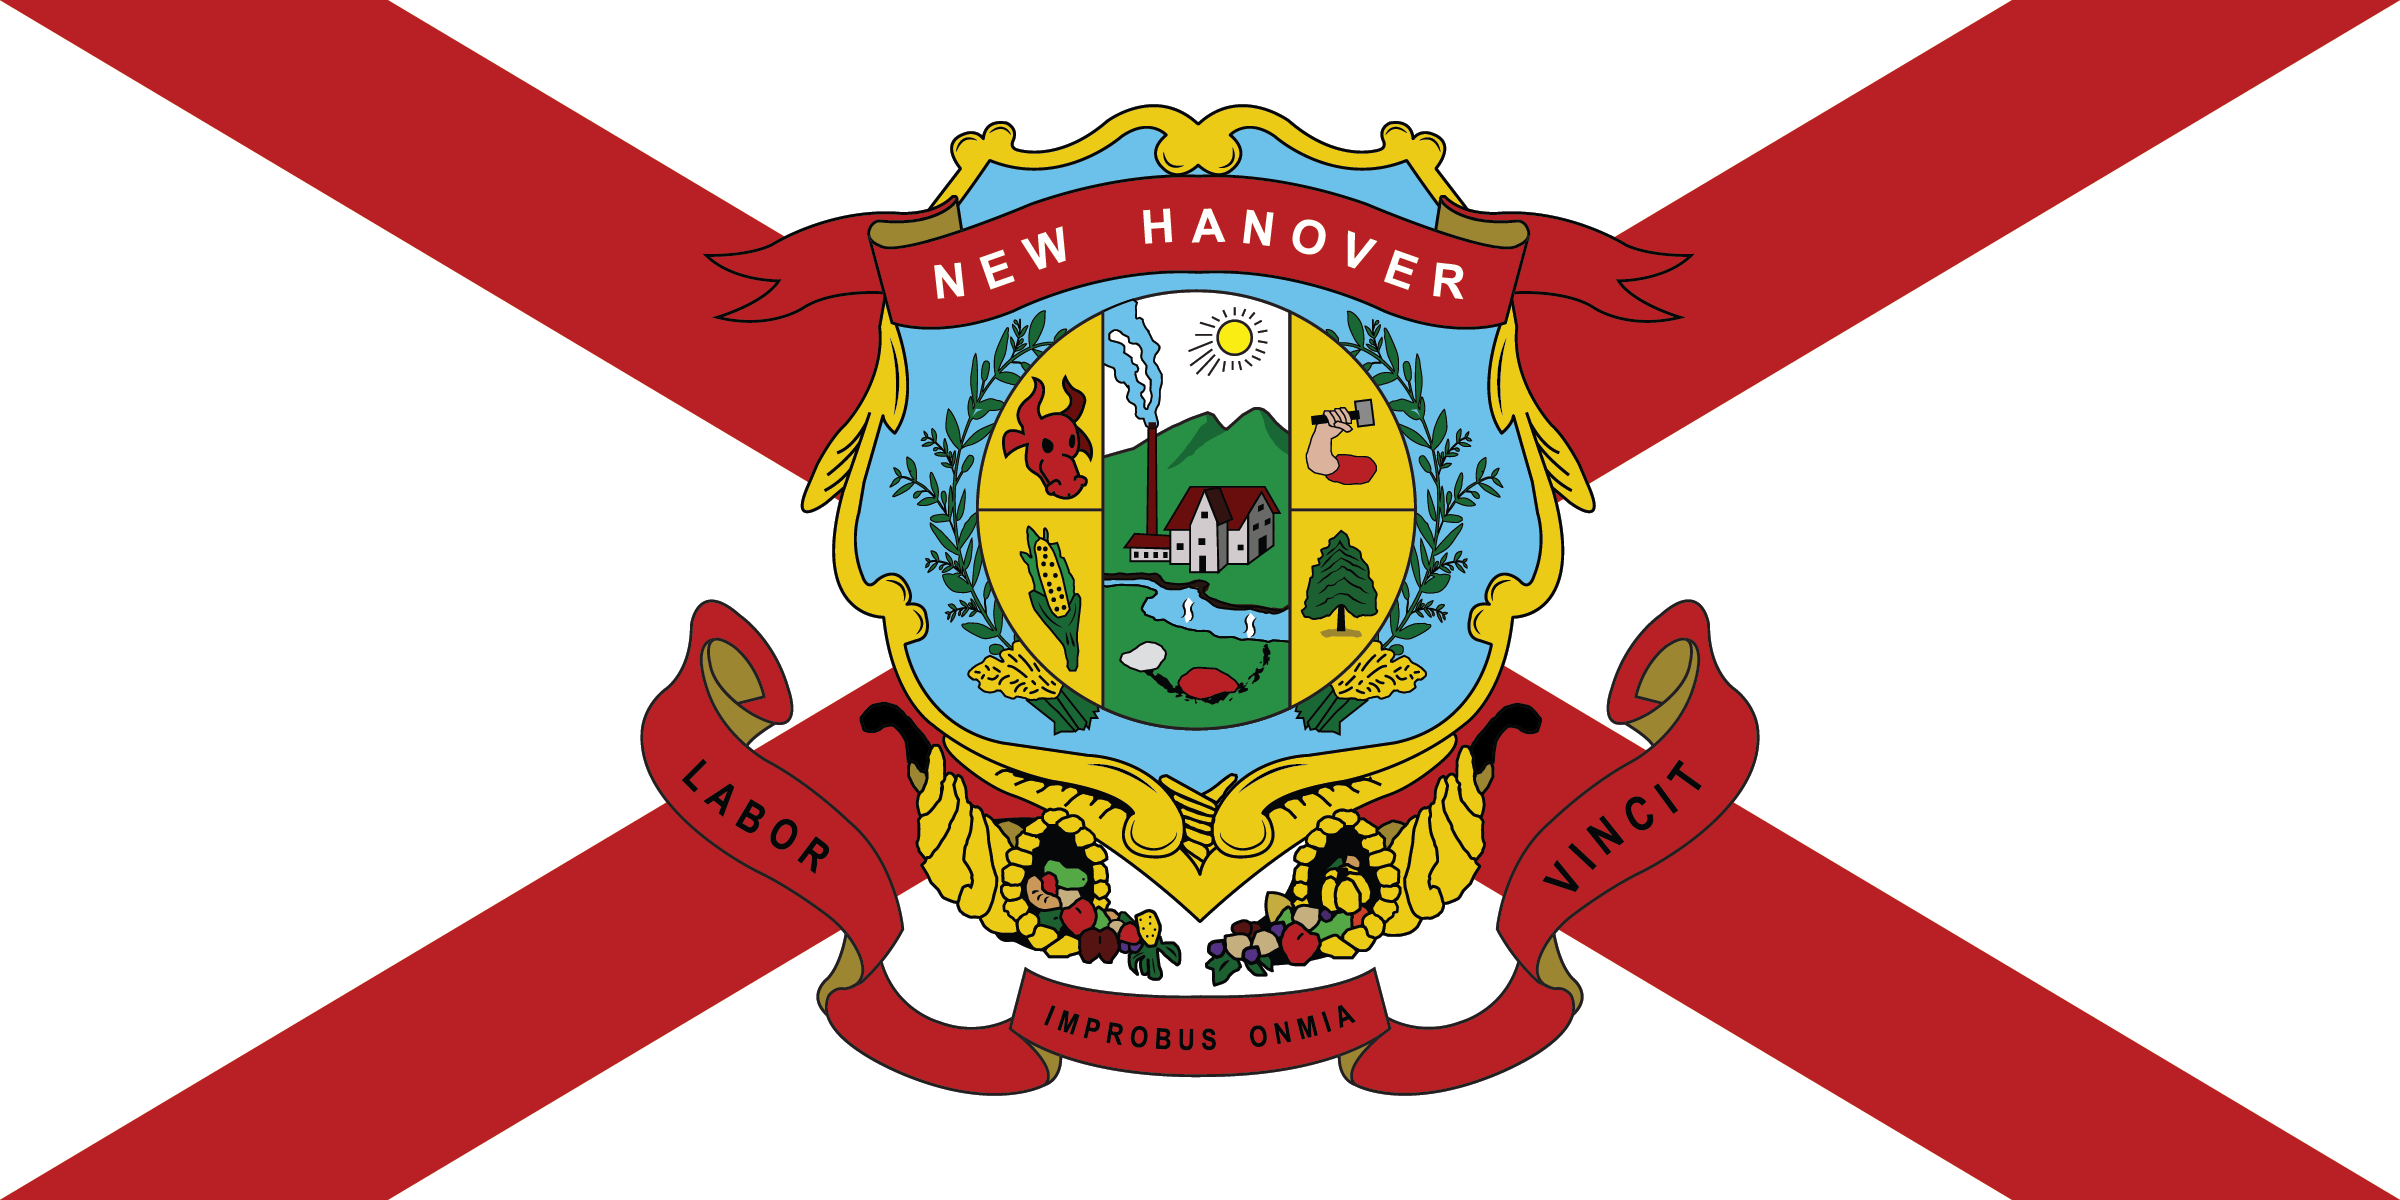 The states of New Hanover, Ambarino and Lemoyne are new to the series, and  are located